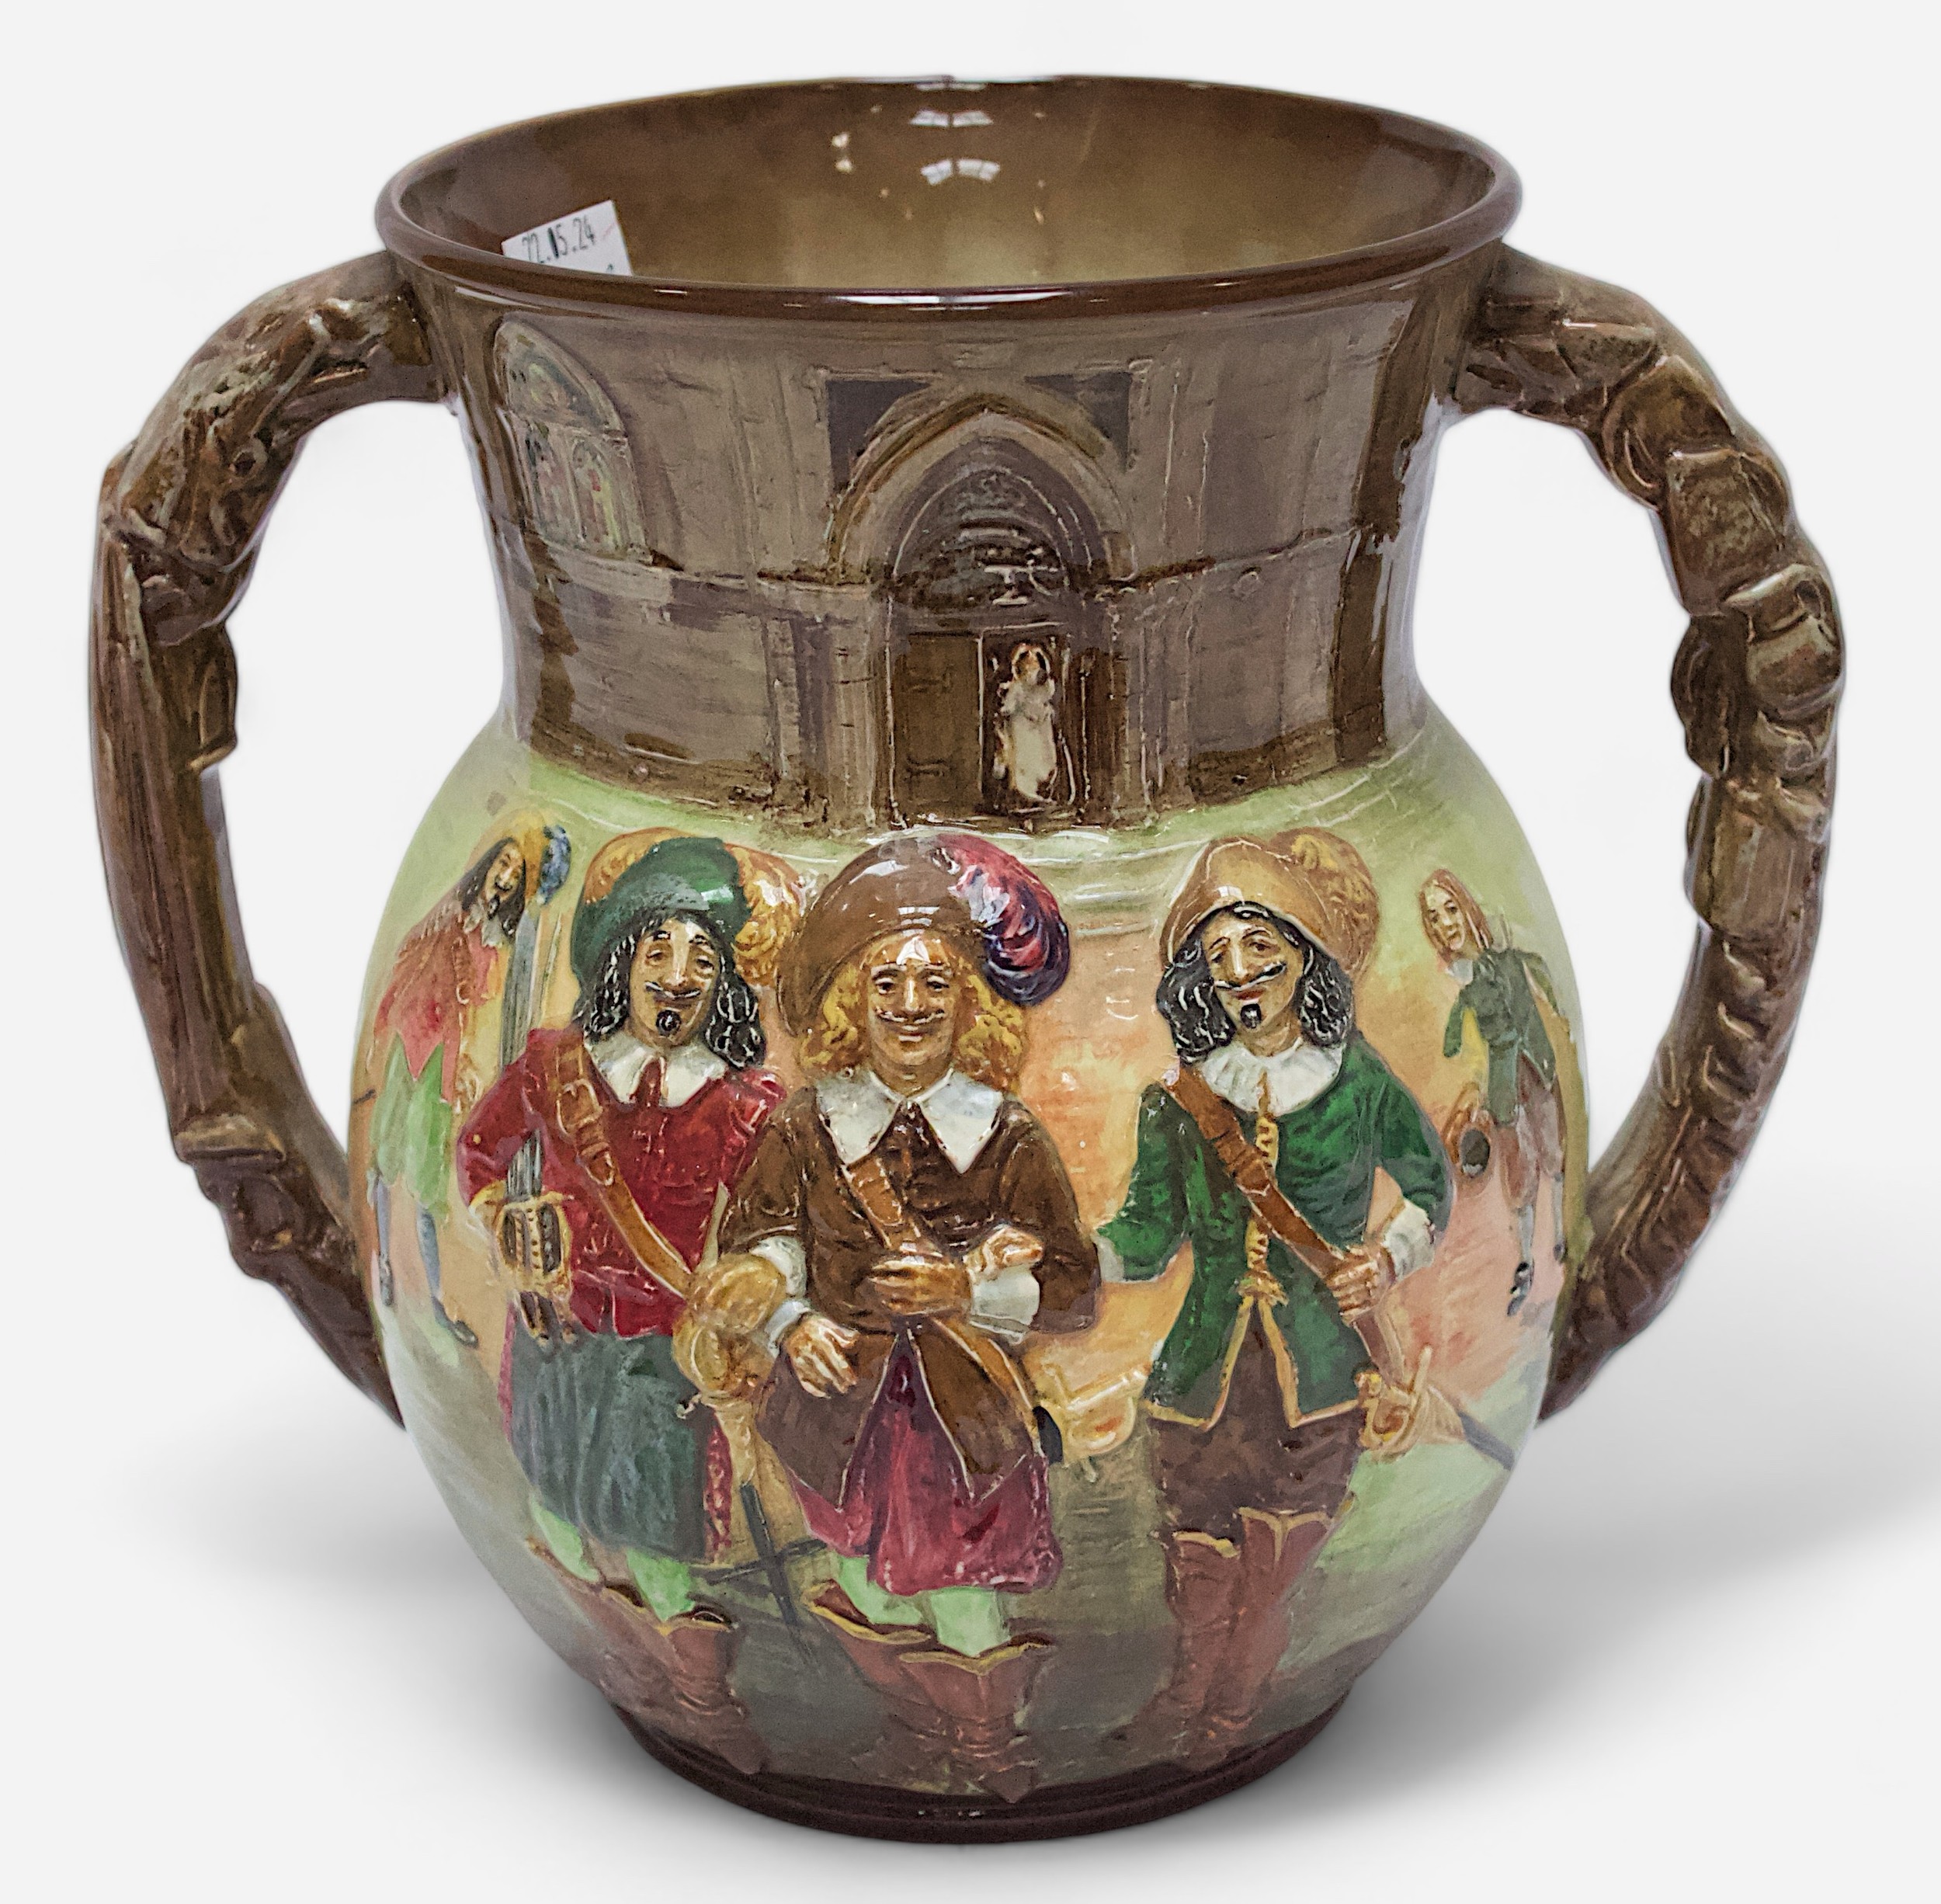 A Royal Doulton loving cup, ‘The Great Romance of Louis XIII Reign’ The Three Musketeers by Dumas,